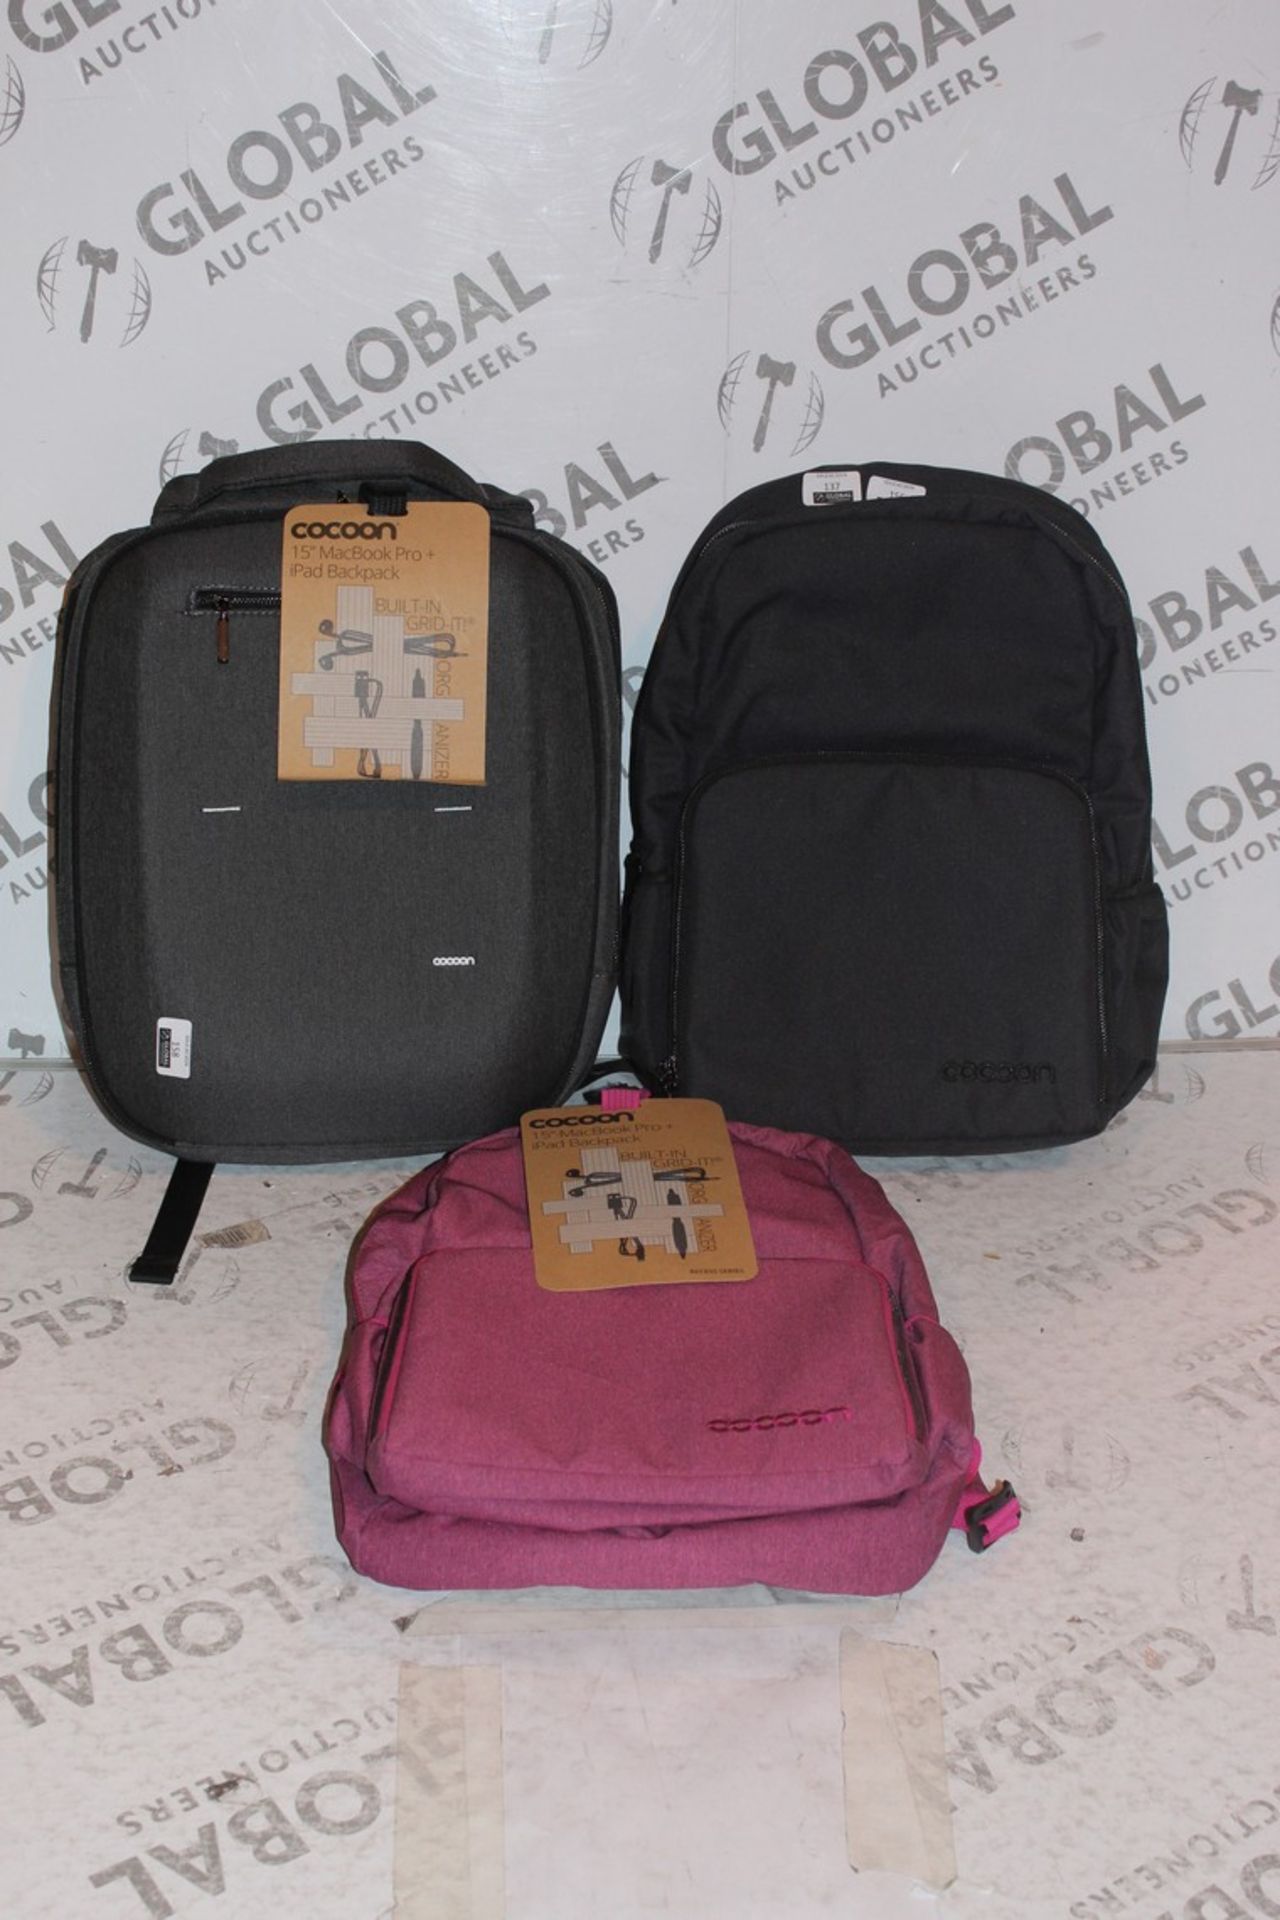 Lot to Contain 5 Assorted Brand New Cocoon Backpacks (As Seen On The Picture To Be Given Out By